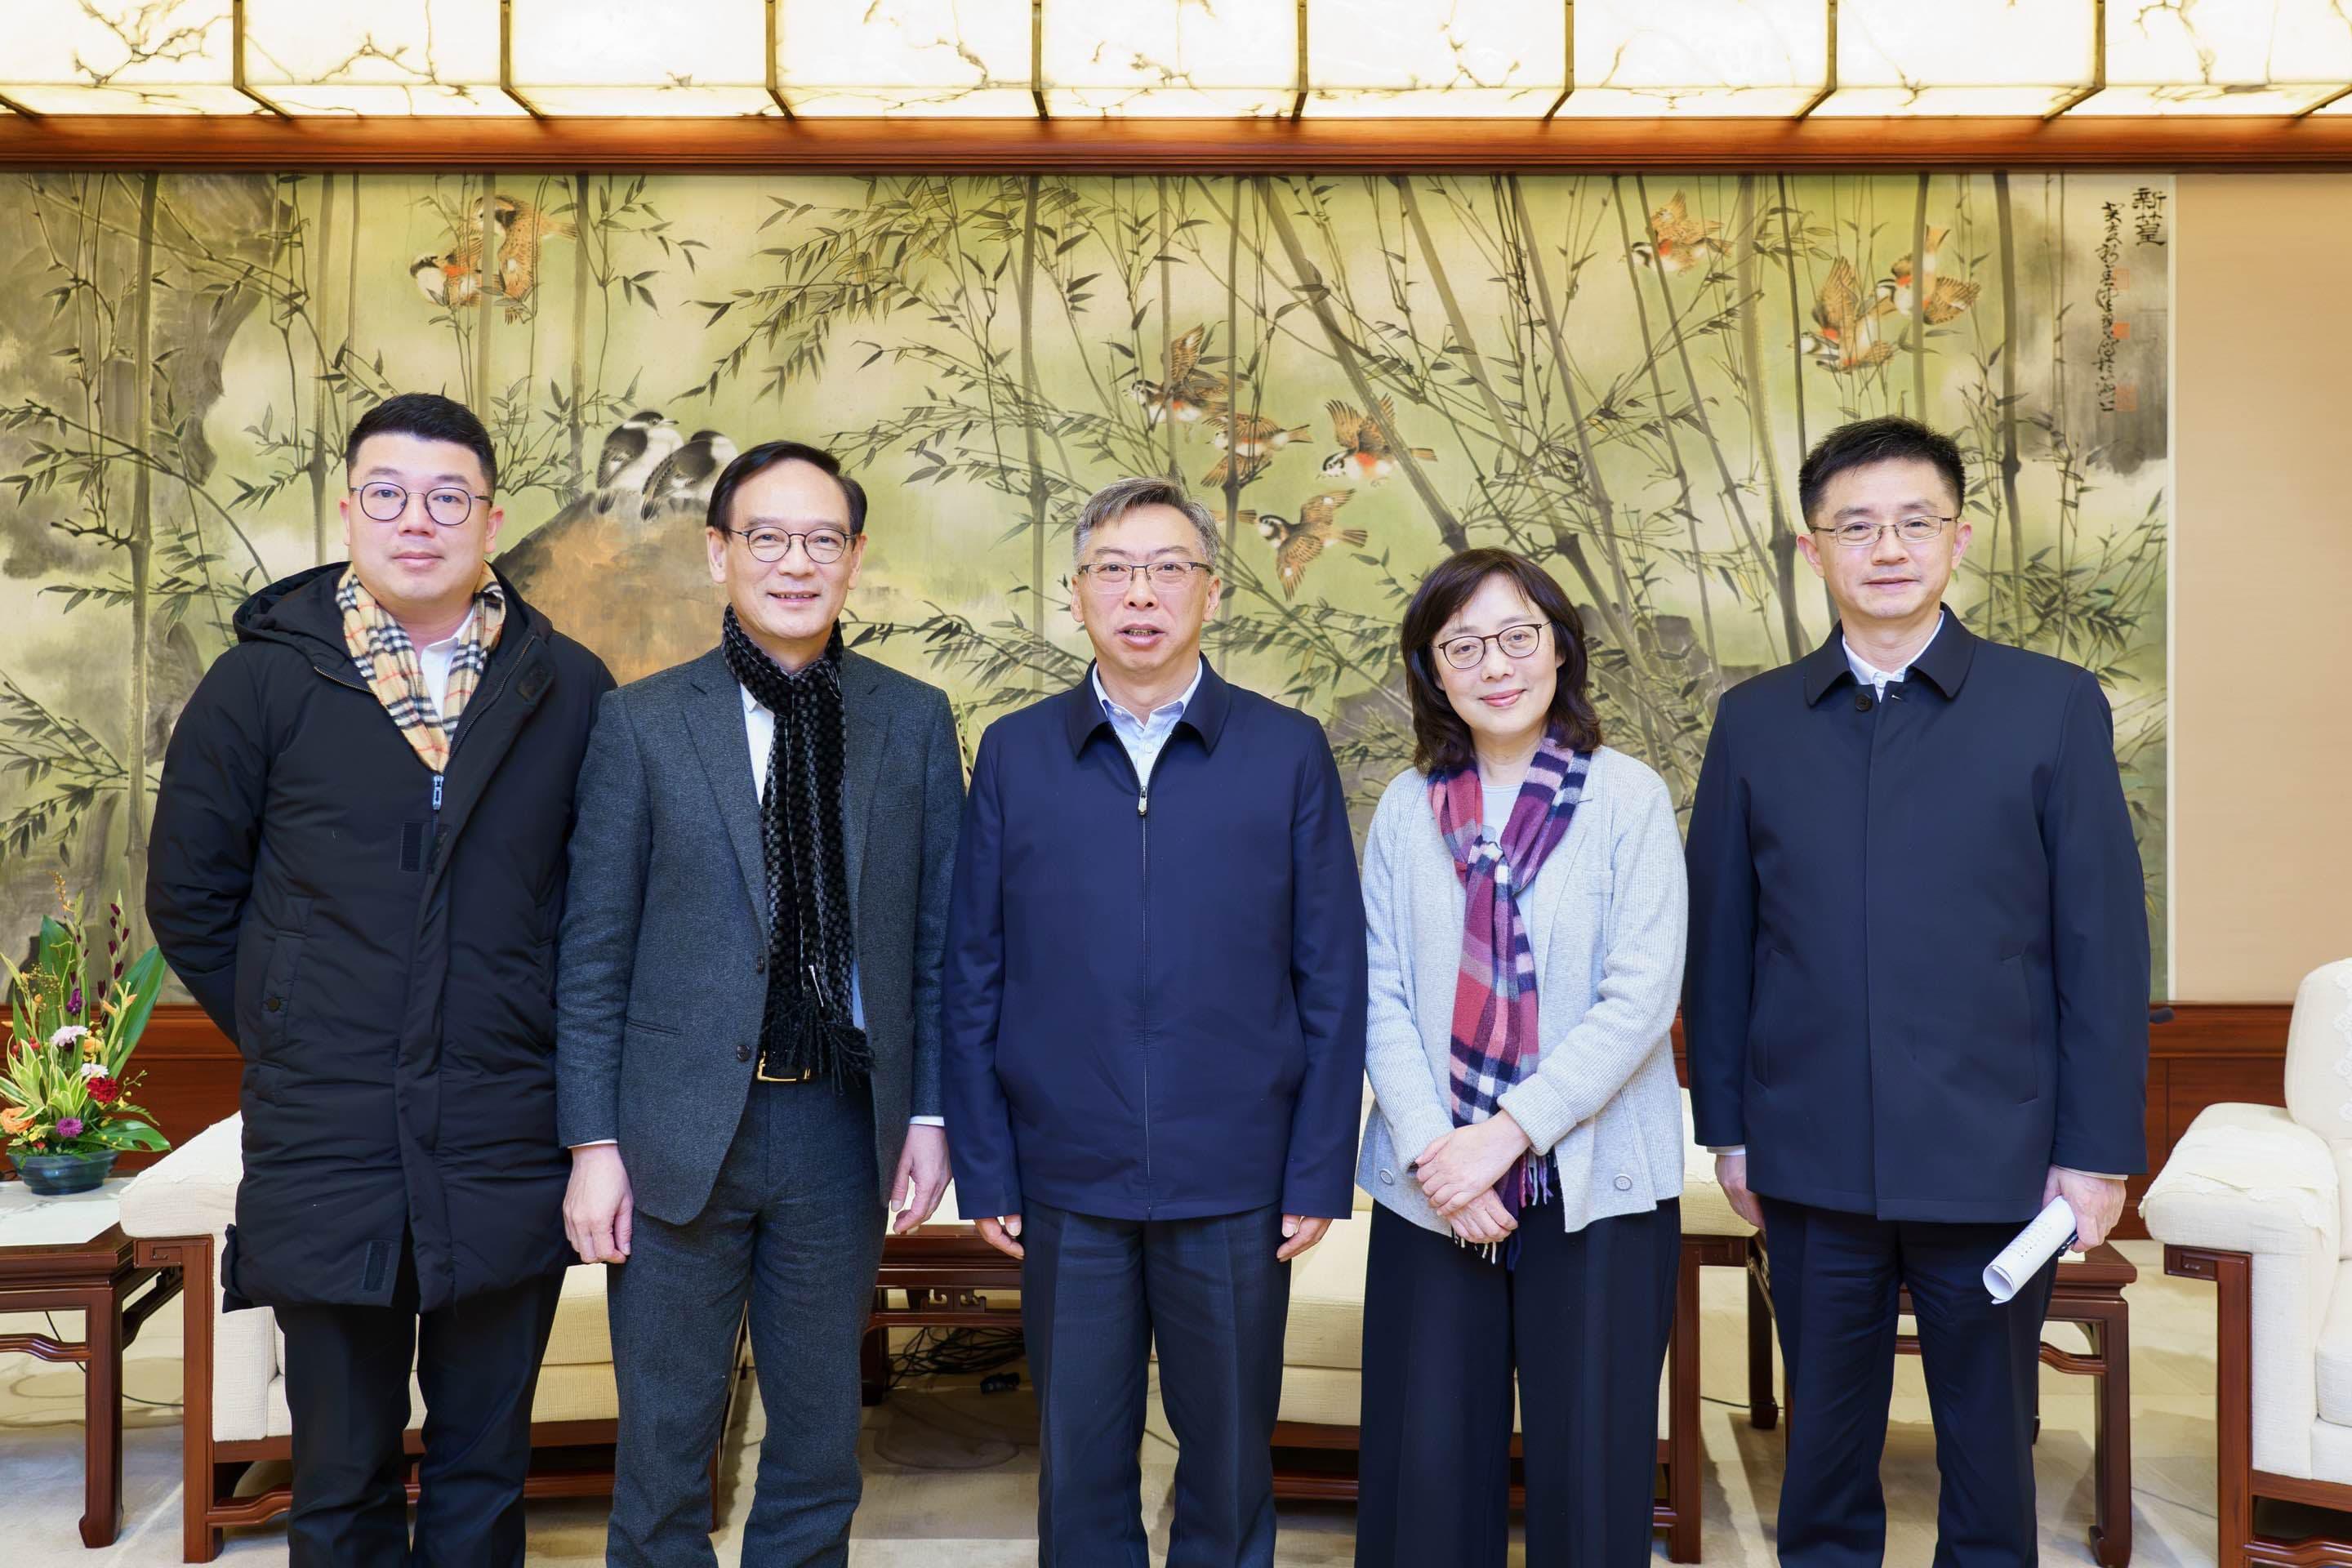 Led by the Secretary for Development, Ms Bernadette Linn, the delegation of the Development Bureau concluded the visit to Shanghai today  (December 21). Photo shows Vice Mayor of the Shanghai Municipal People's Government (SMPG) Mr Zhang Xiaohong (centre); Deputy Secretary-General of the SMPG Mr Wang Weiren (first right); Ms Linn (second right), the Chairman of the Legislative Council Panel on Development, Mr Tony Tse (second left) ; and Deputy Chairman, Mr Lau Kwok-fan (first left).